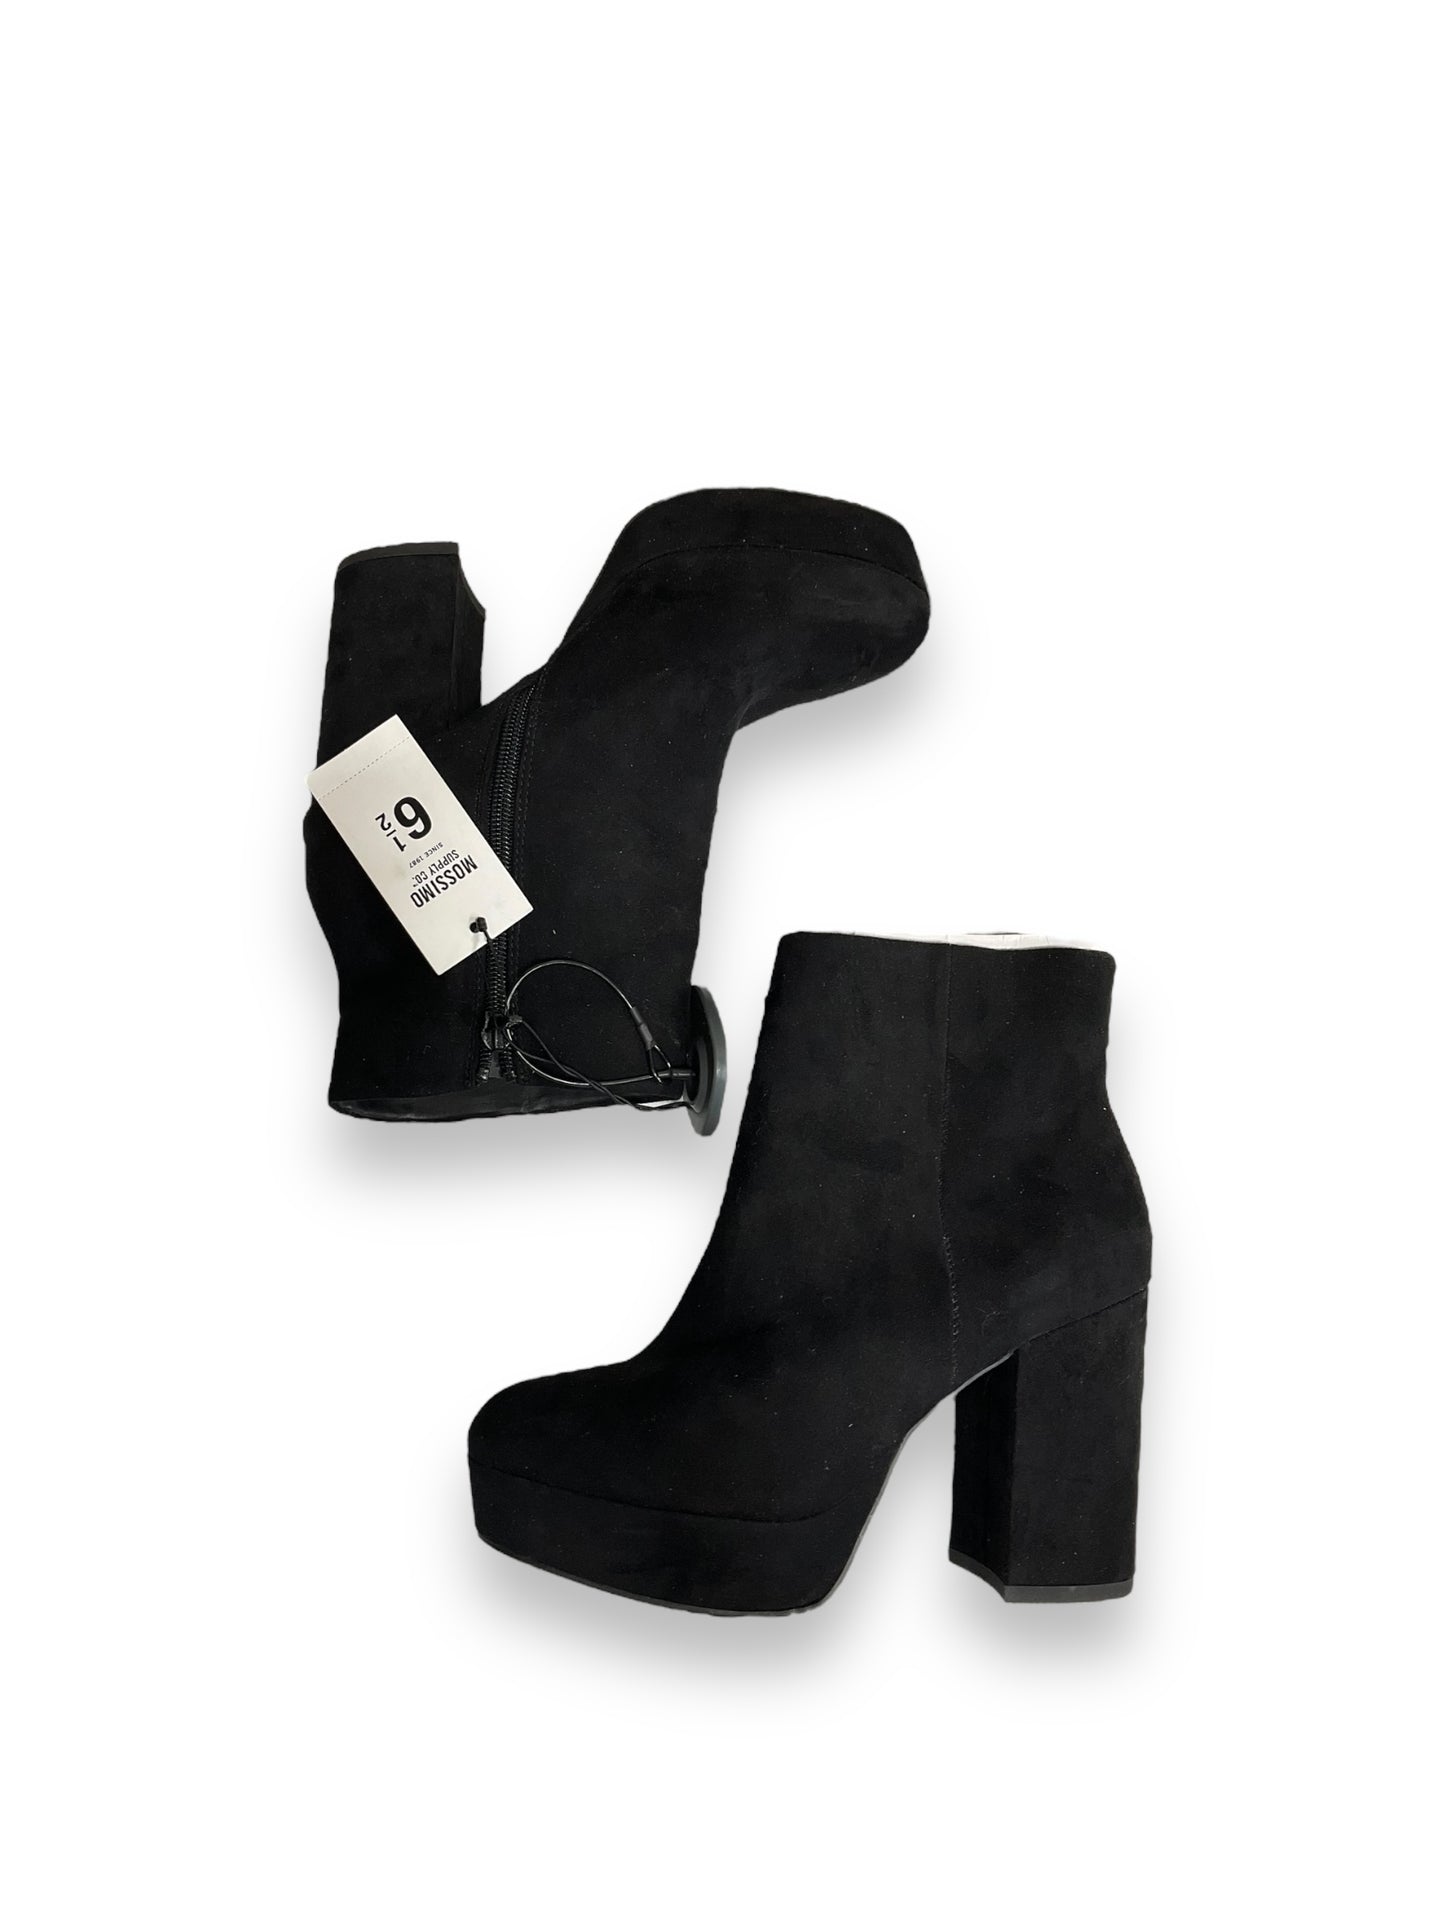 Boots Ankle Heels By Mossimo  Size: 6.5